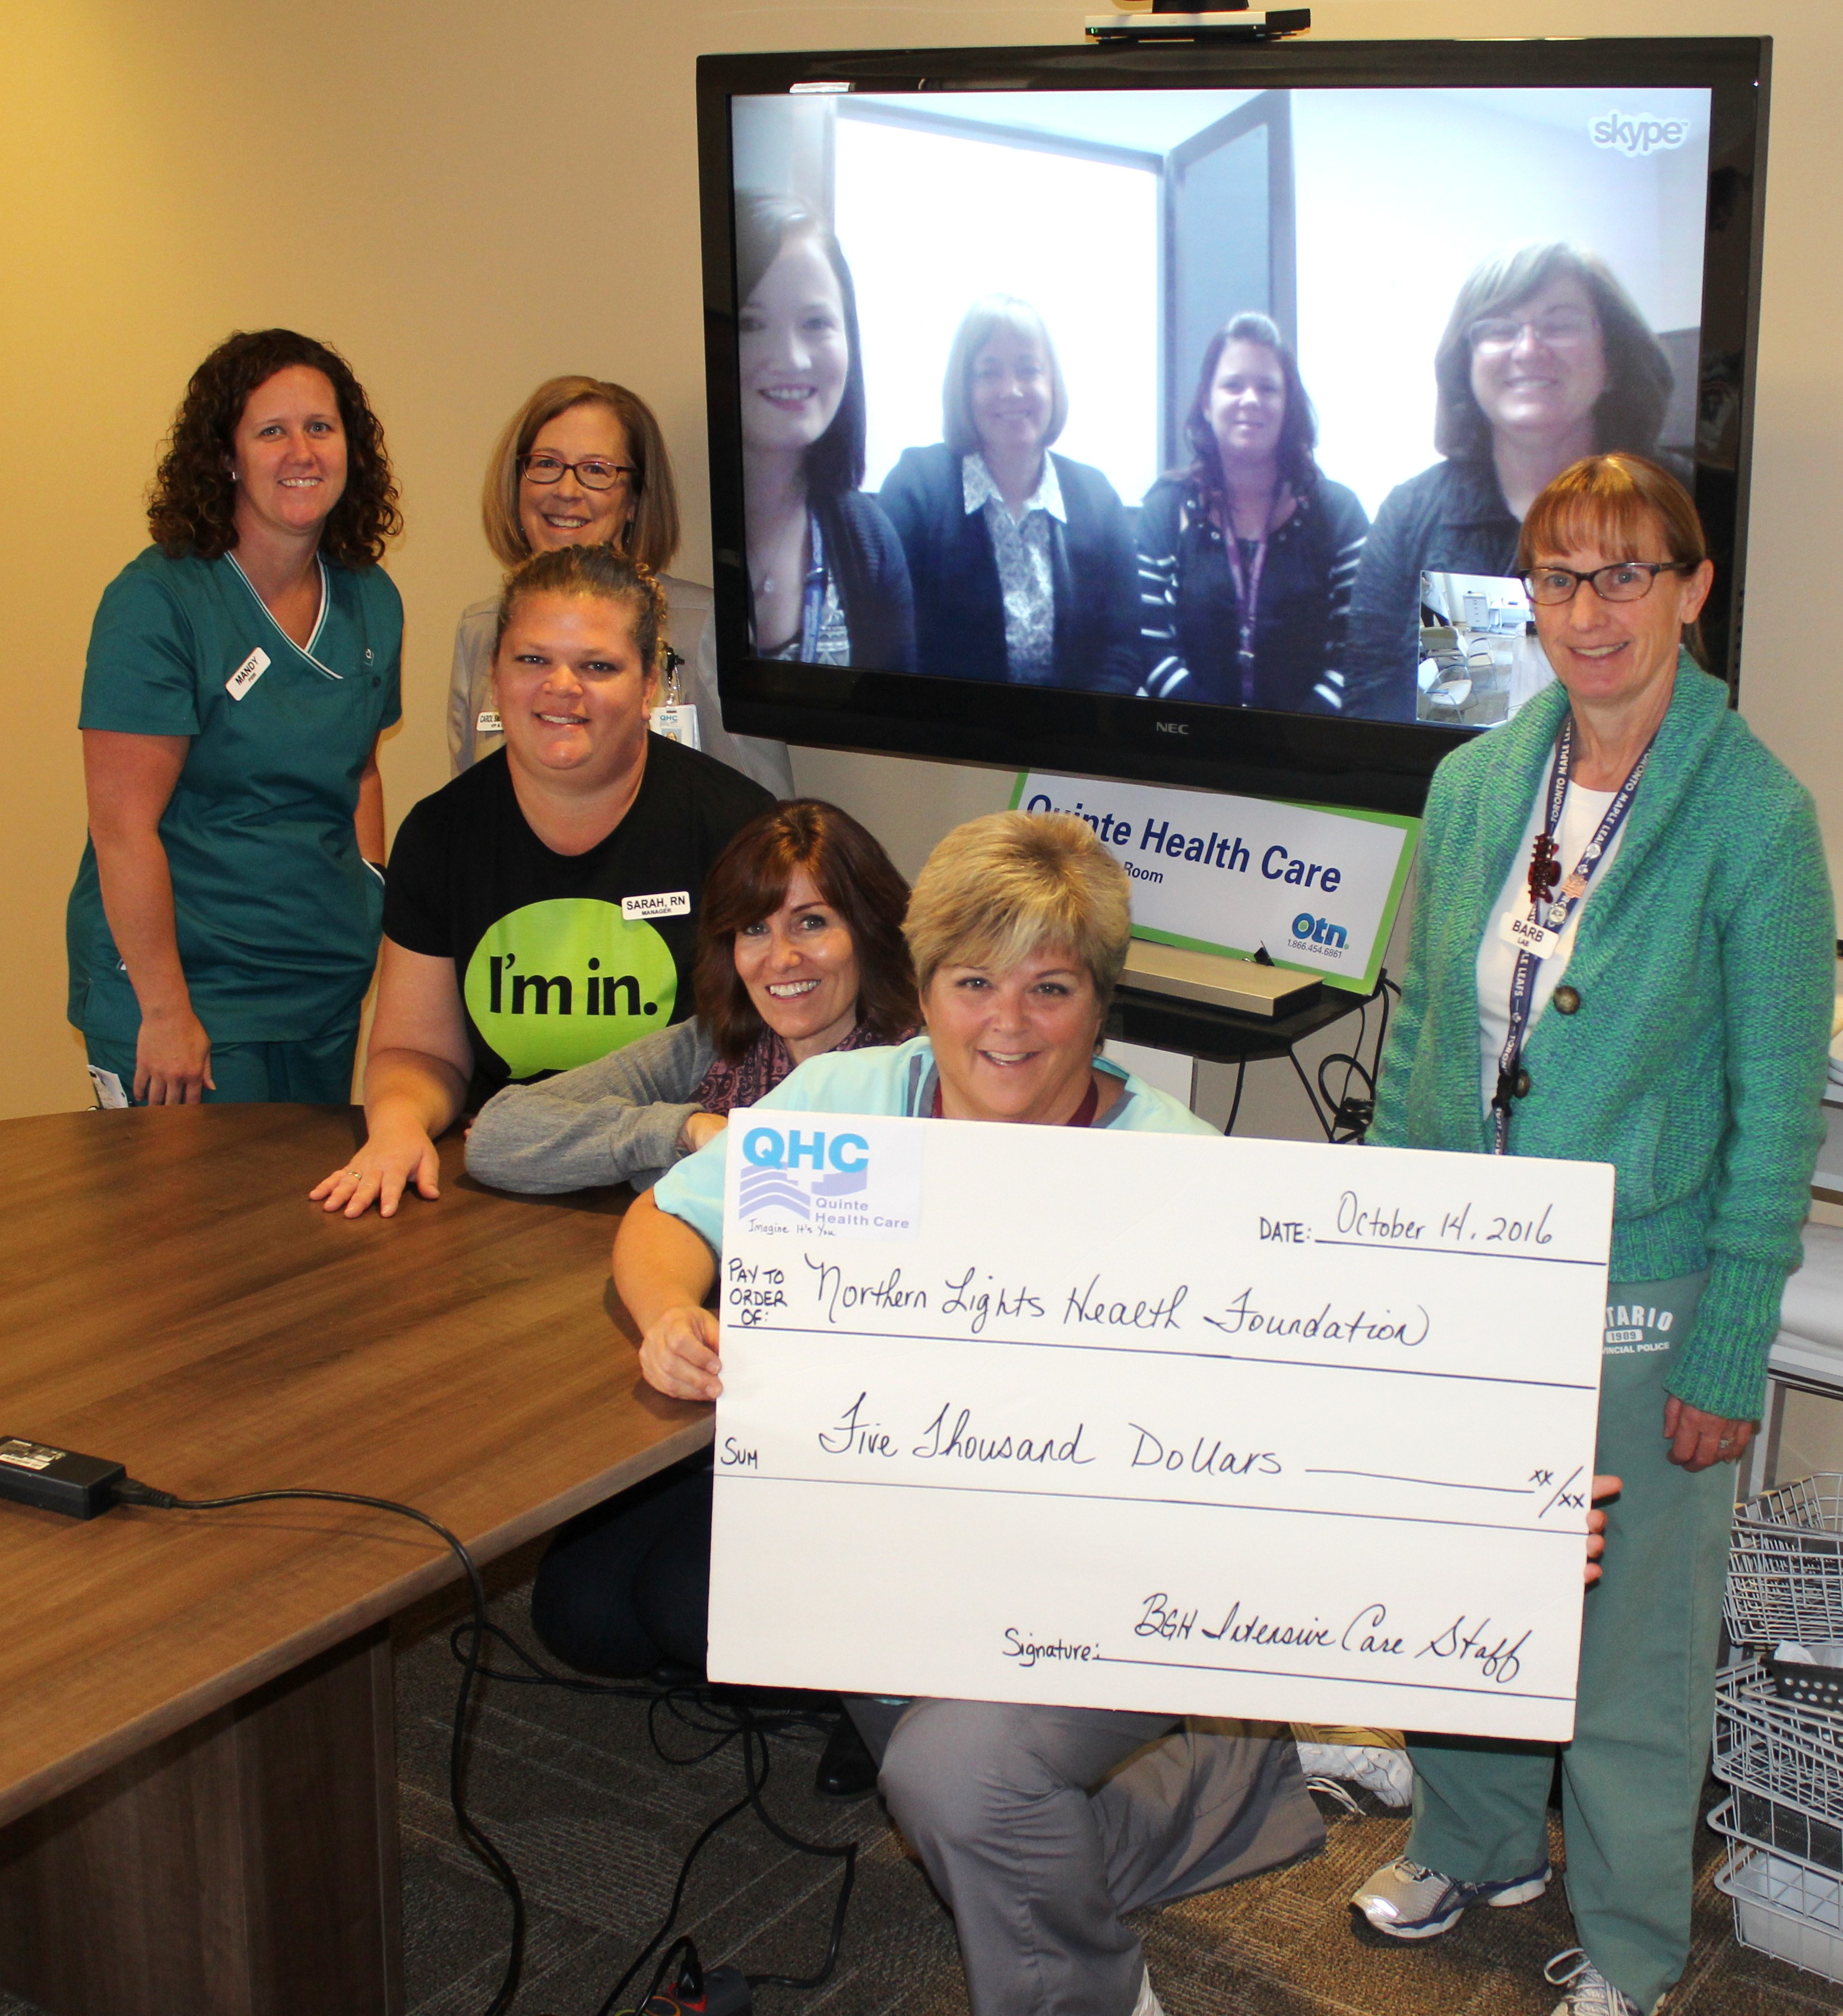 ICU nurses at Belleville General Hospital revealed the $5,000 cheque over Skype to the Northern Lights Health Foundation team and nurses. Photo courtesy of Belleville General Hospital